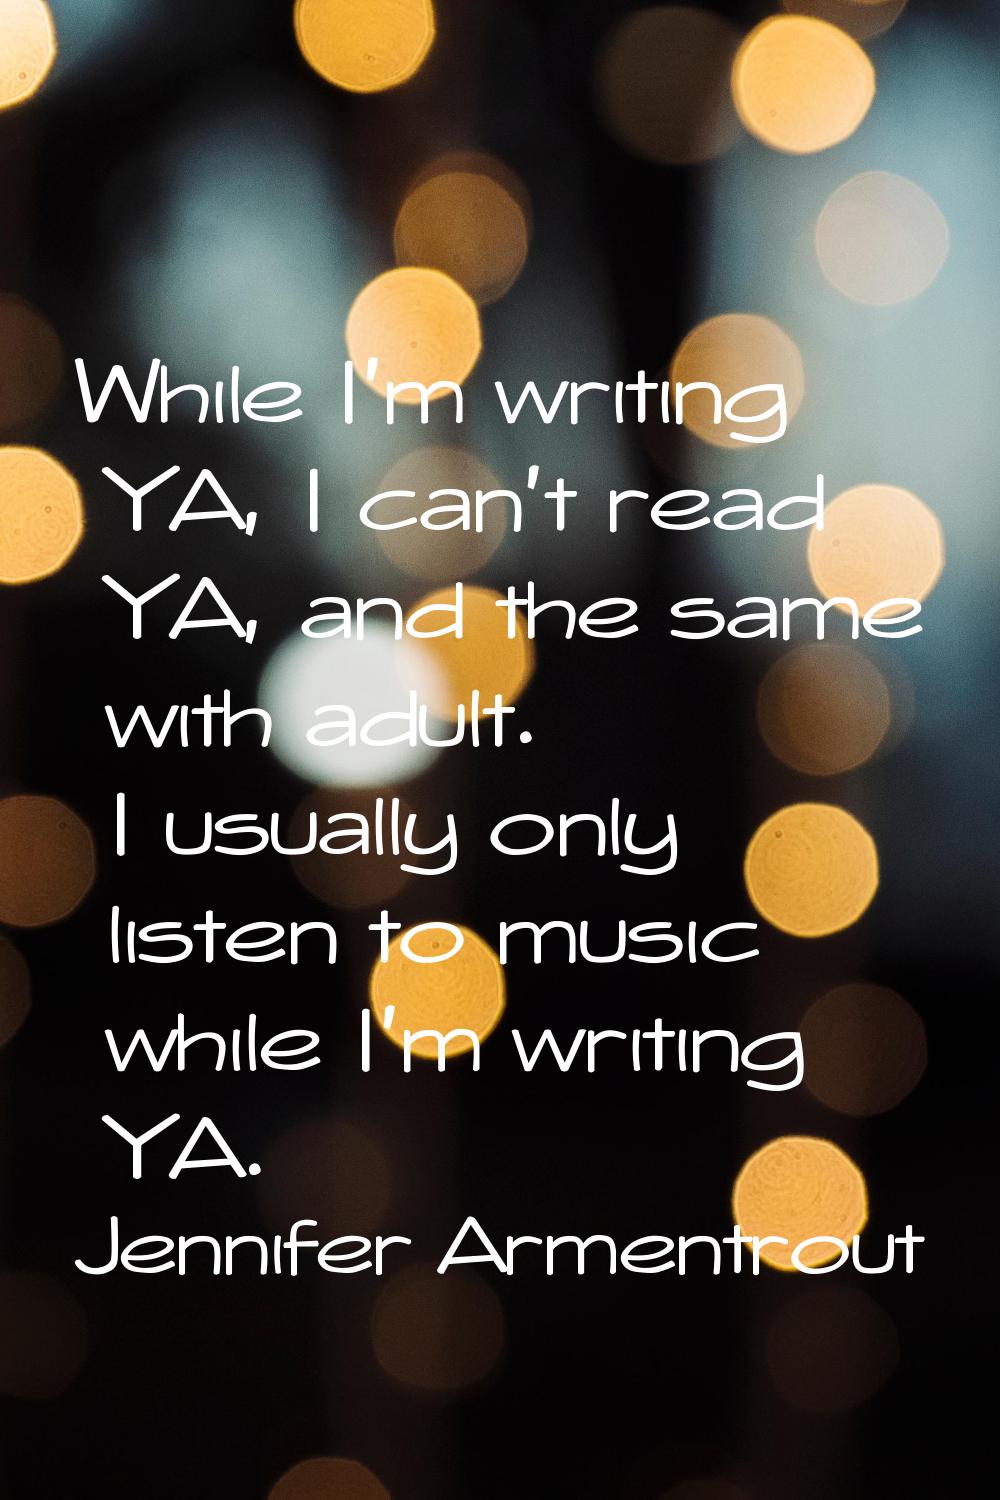 While I'm writing YA, I can't read YA, and the same with adult. I usually only listen to music whil